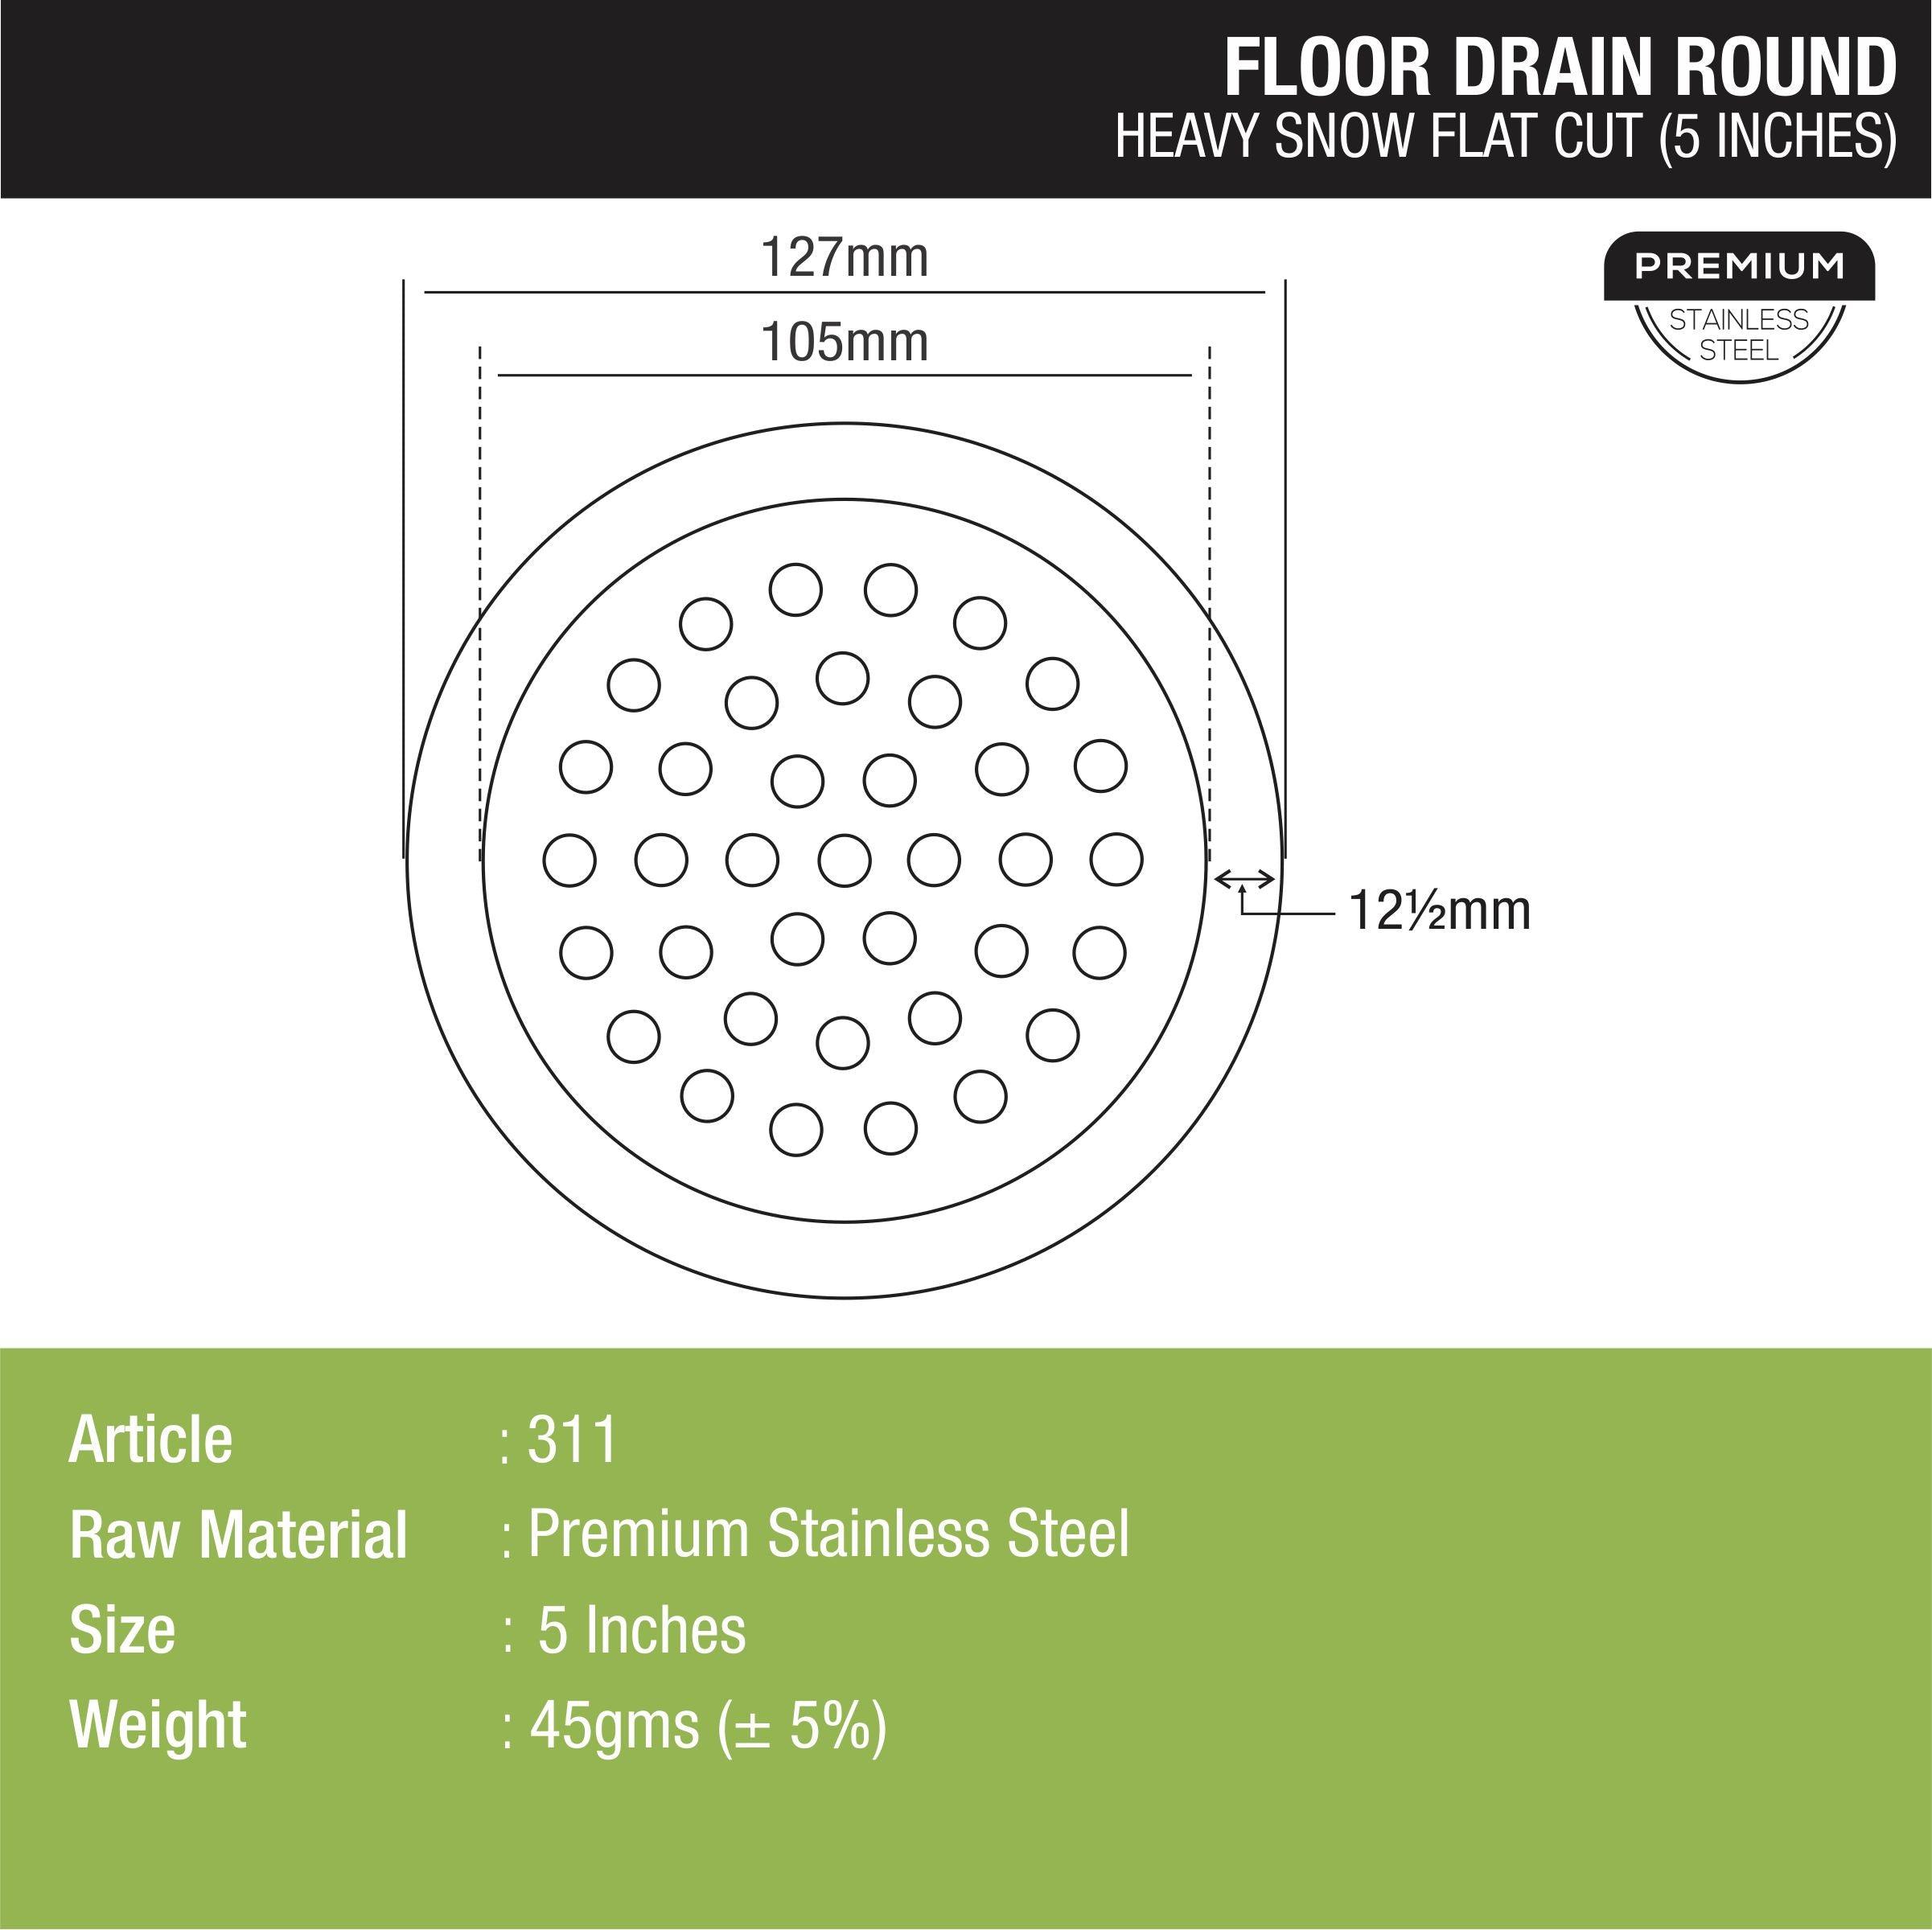 Heavy Snow Round Flat Cut Floor Drain (5 inches) dimensions and sizes